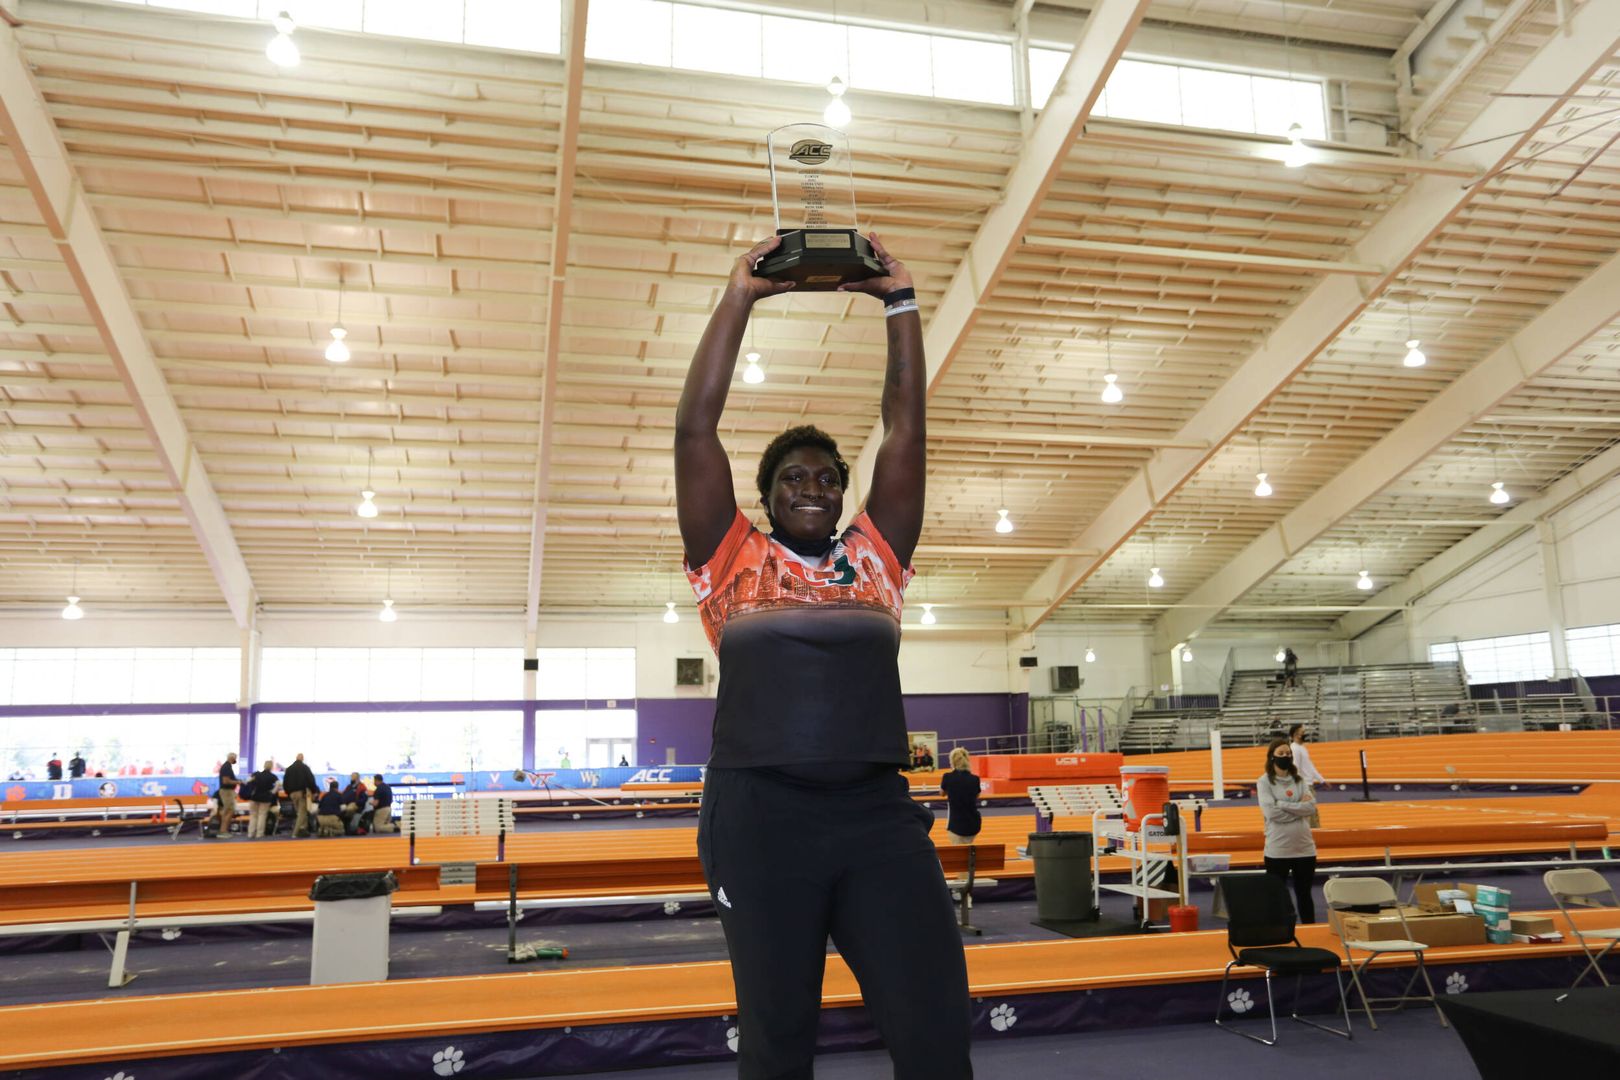 Ajagbe Defends ACC Field MVP and Shot Put Title